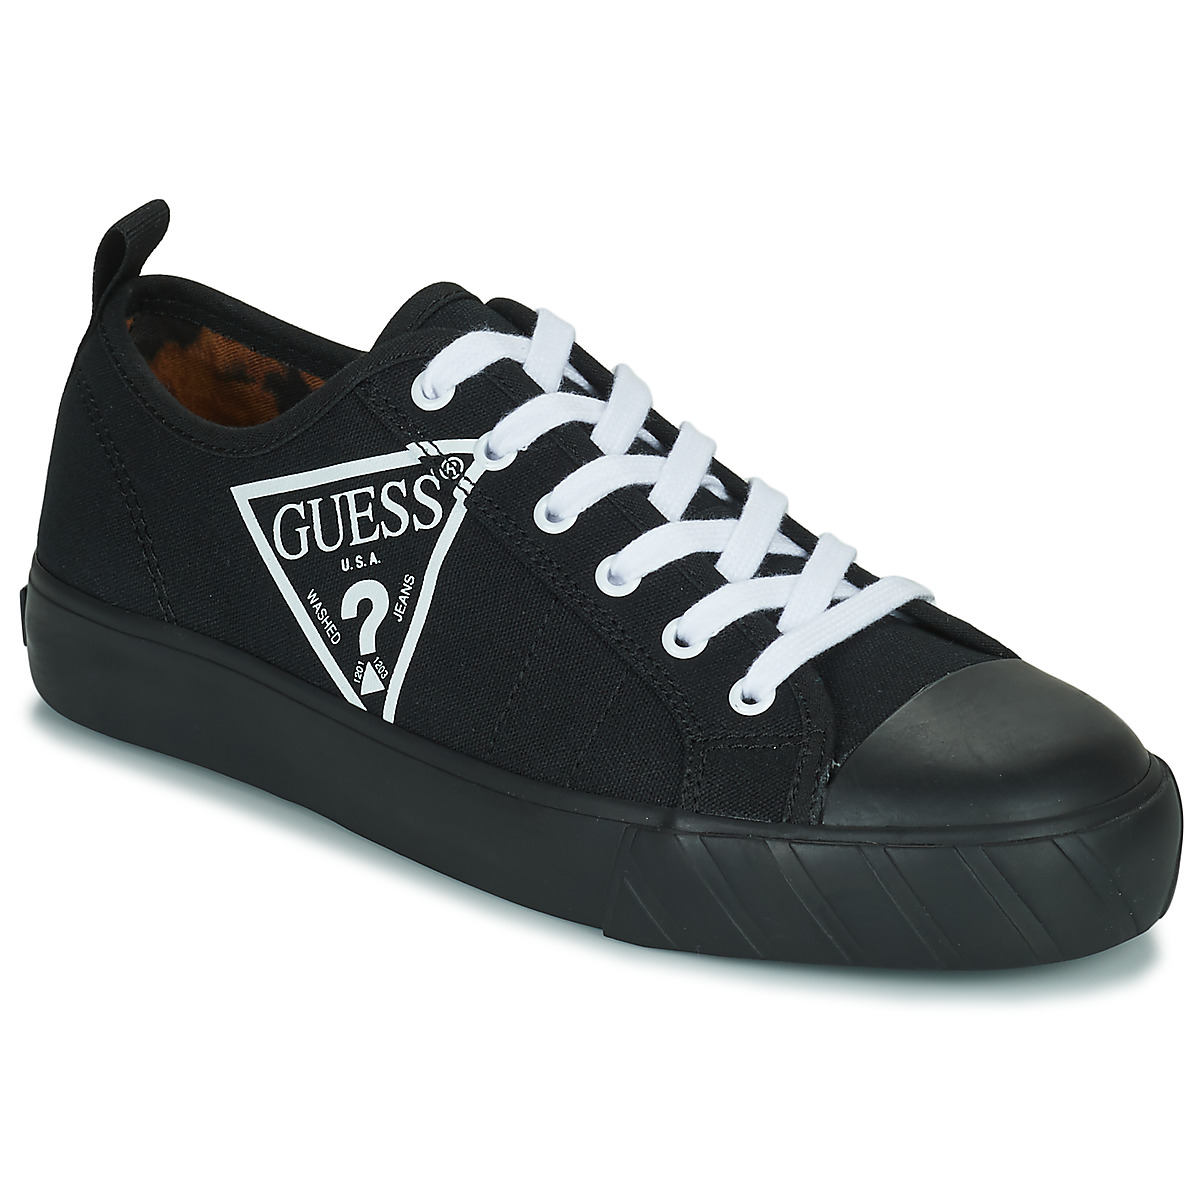 Shoes Women Low top trainers Guess KERRIE Black